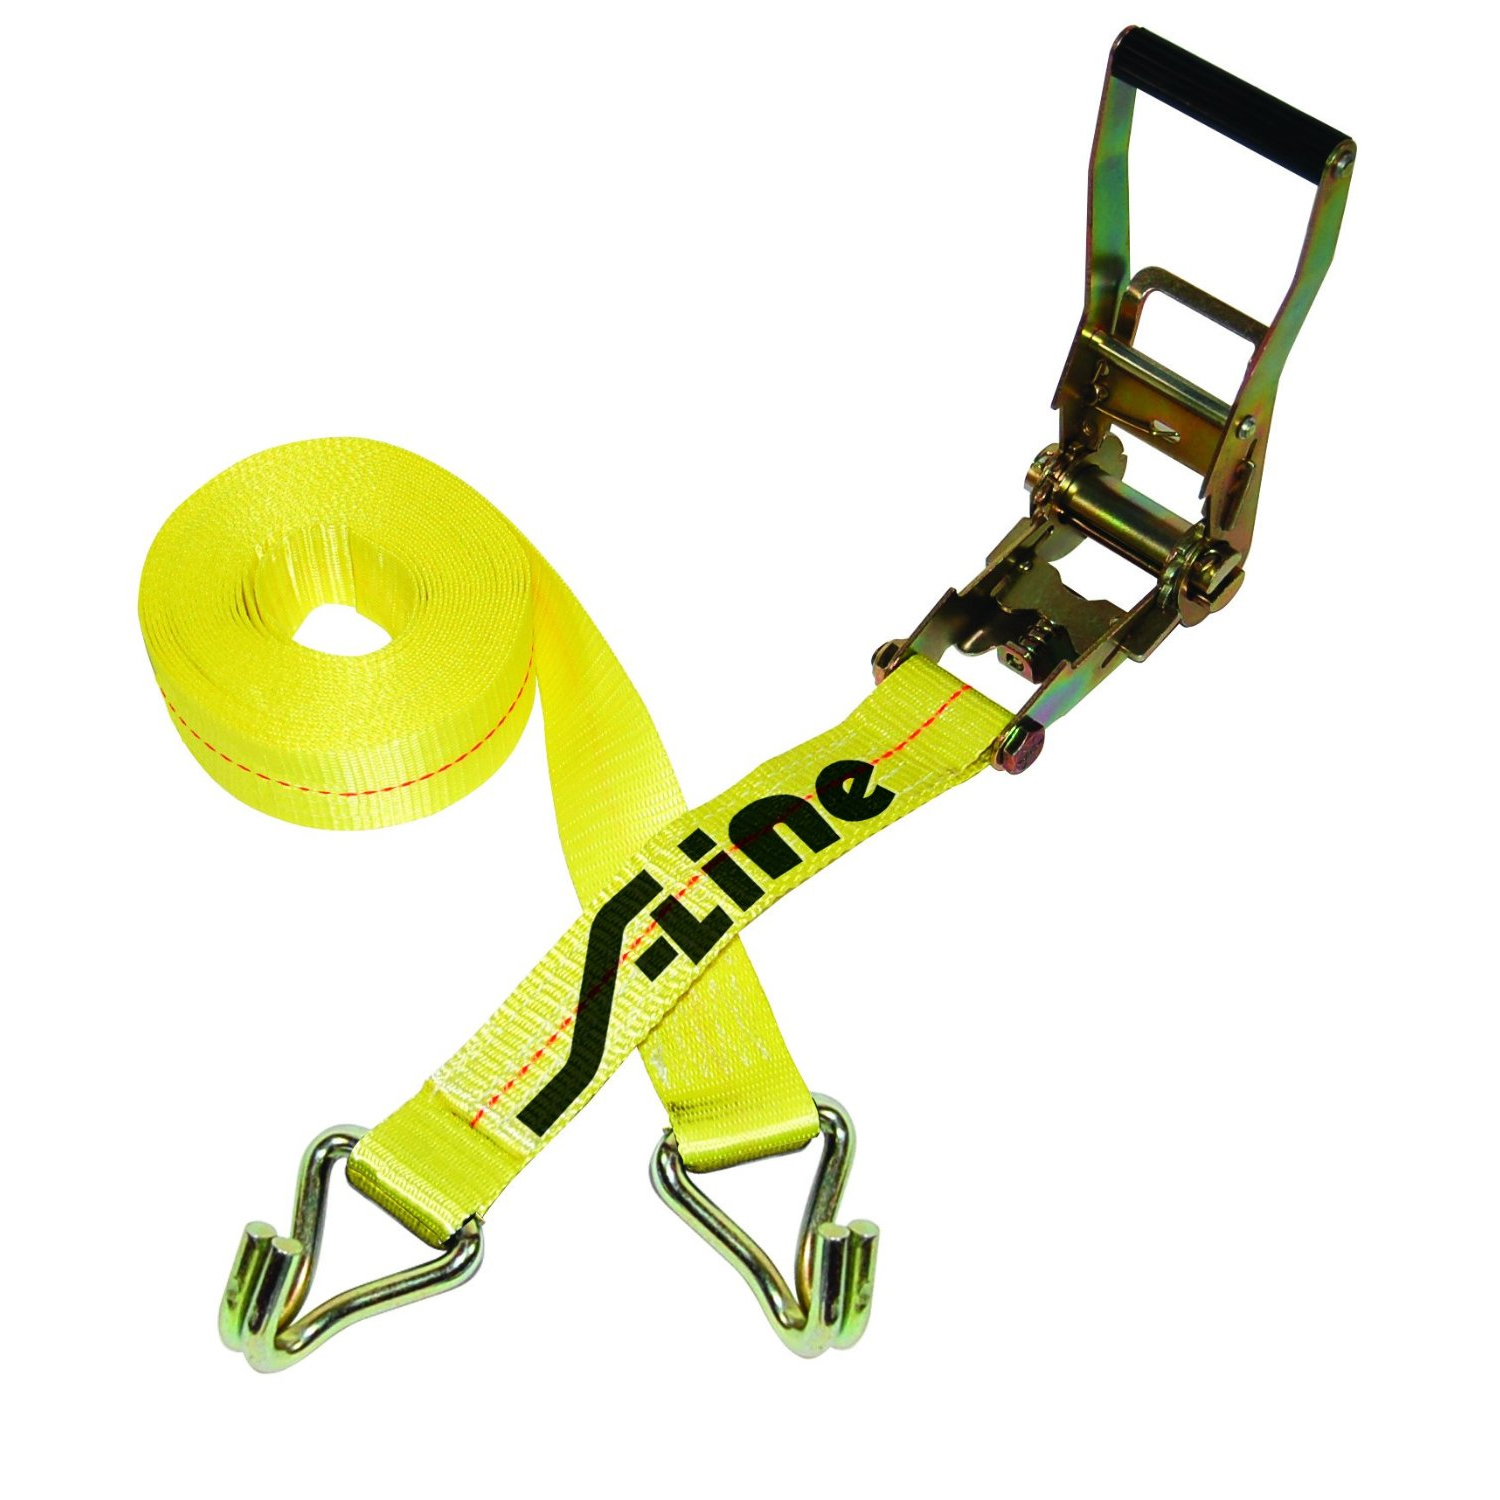 S-Line Ratchet Strap Tie Down with Long Wide Handle and J-Hooks